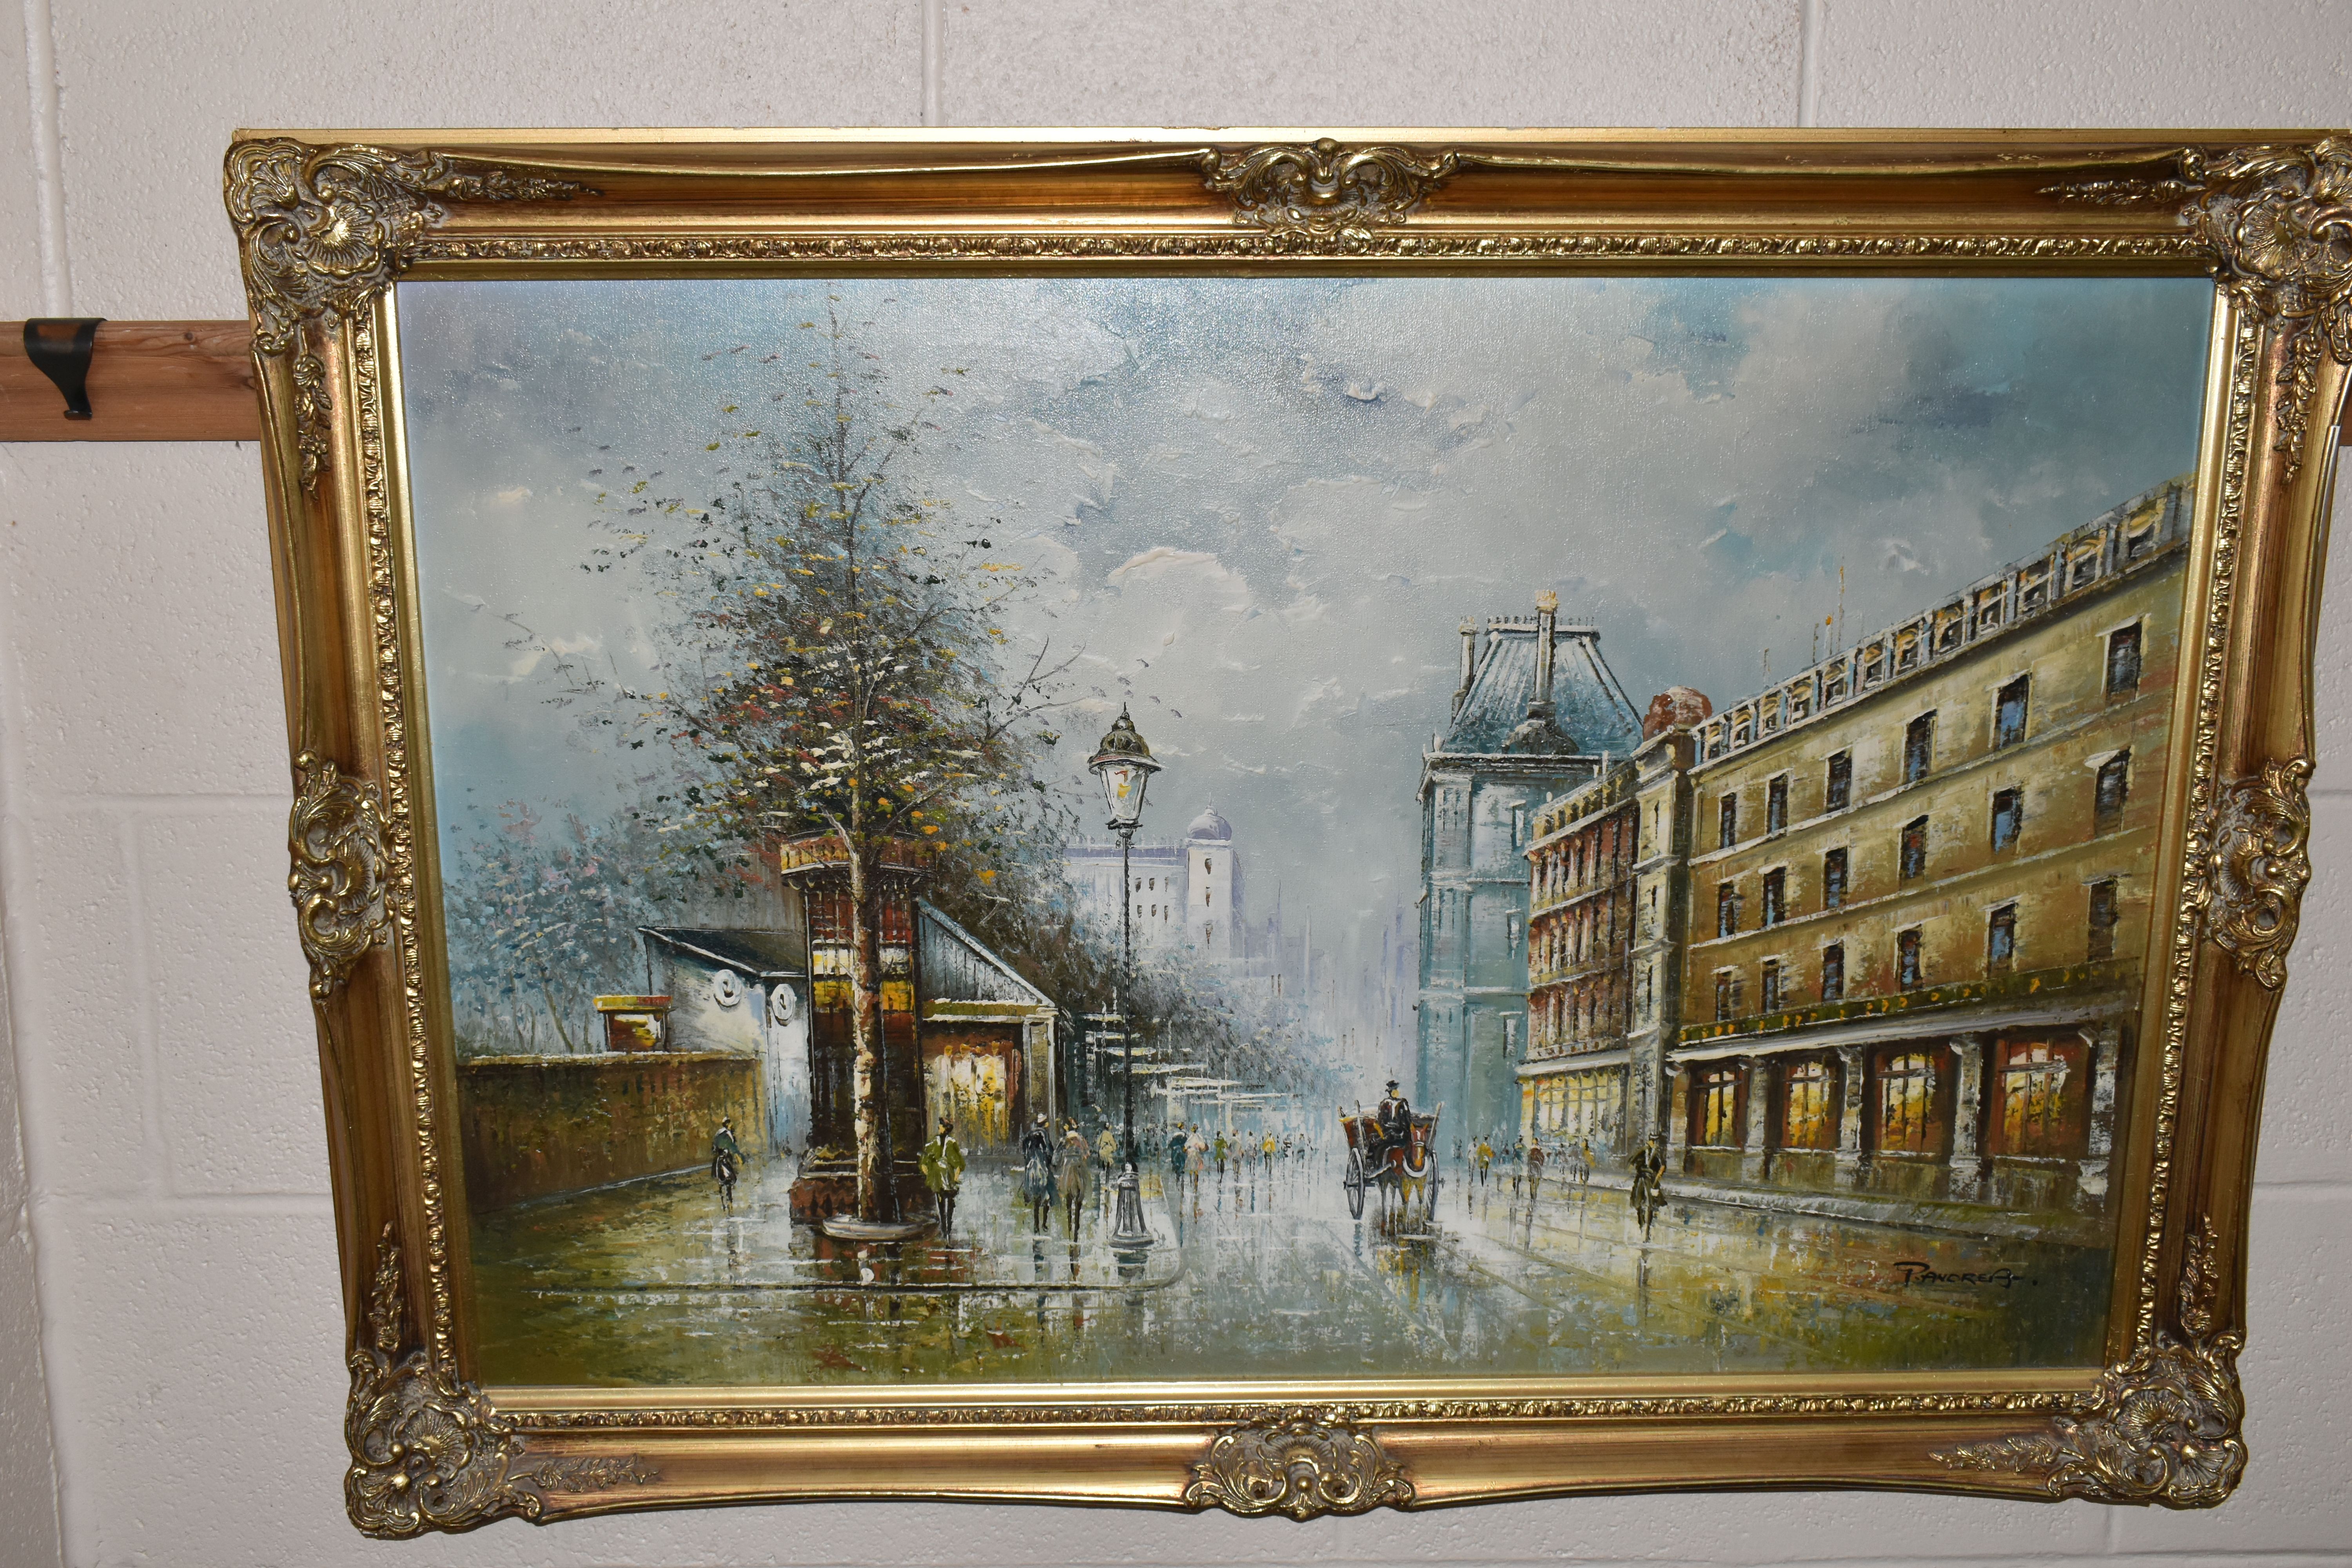 P. ANDREA (20TH CENTURY, CONTINENTAL) Parisian street scene, oil on canvas, signed lower right, 59cm - Image 2 of 4